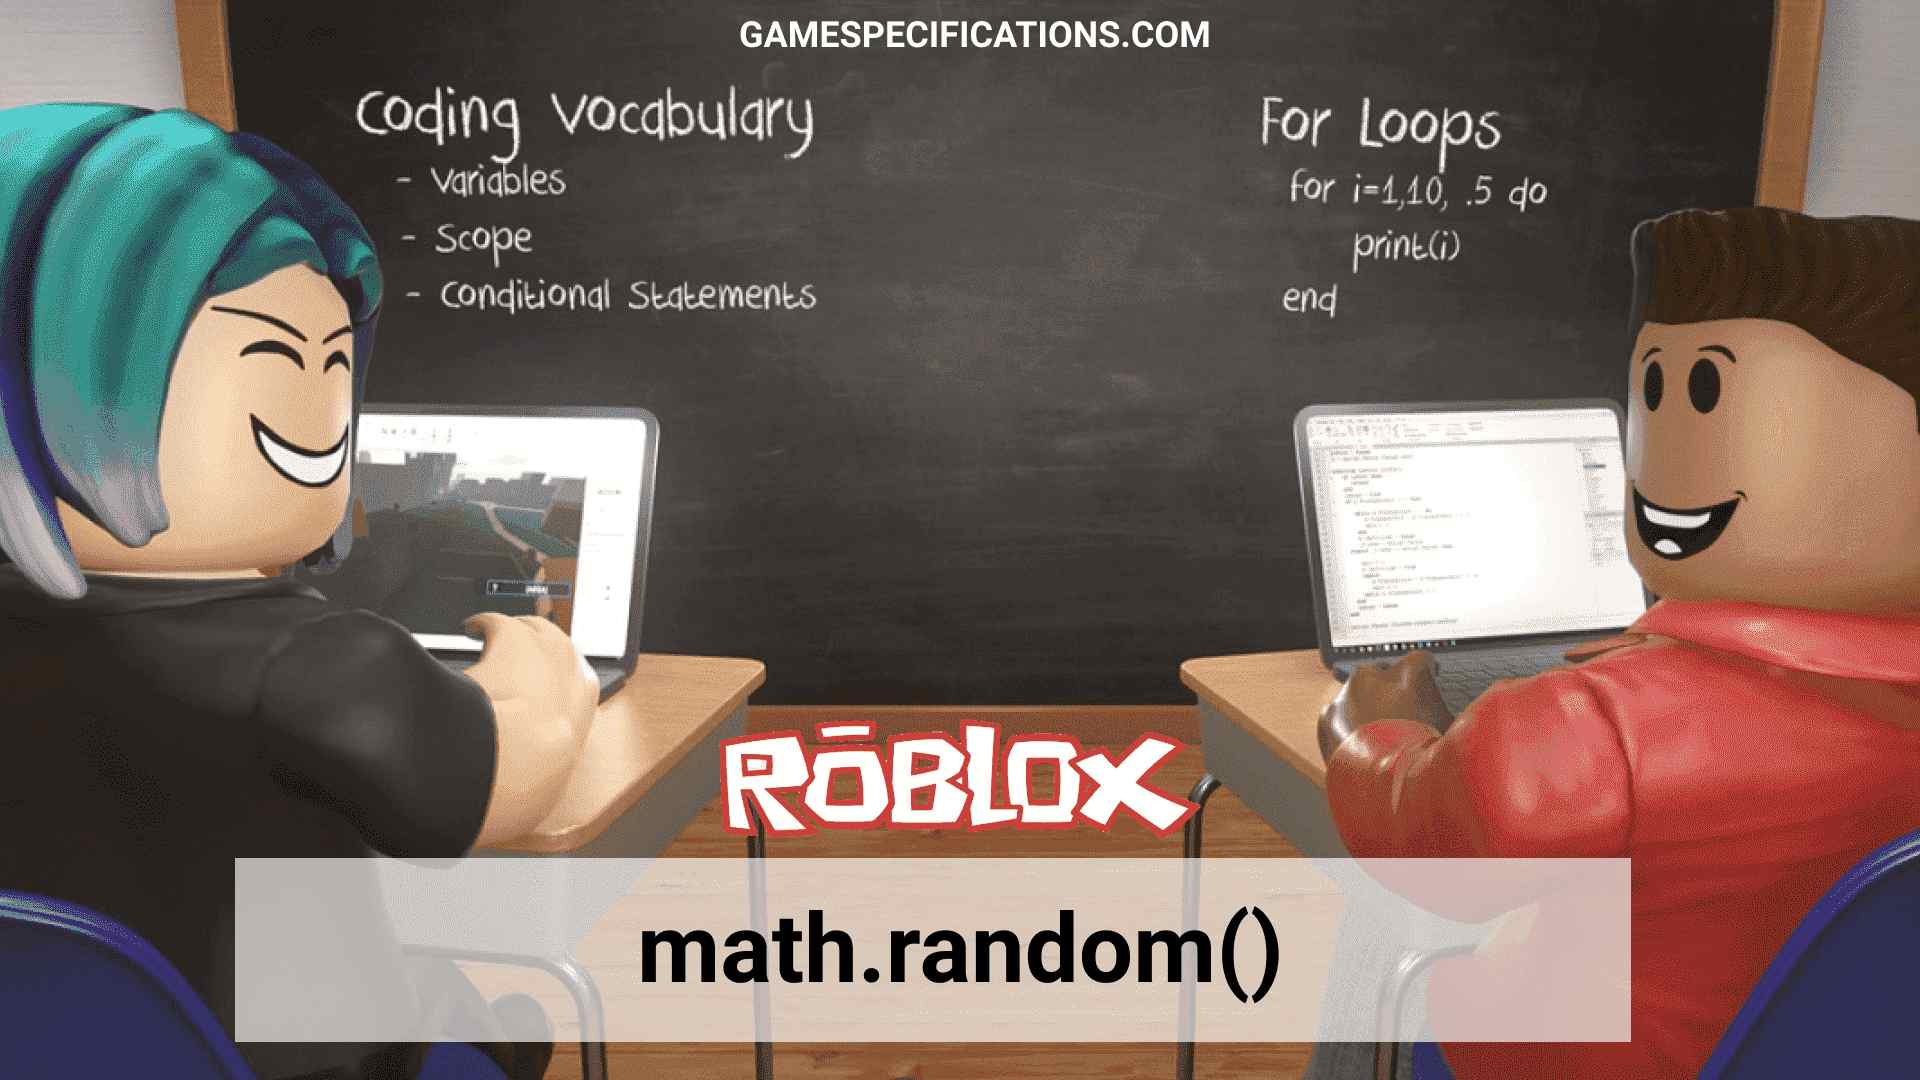 Roblox Math Random How To Use Math Random Efficiently In Roblox Game Specifications - random roblox character generator